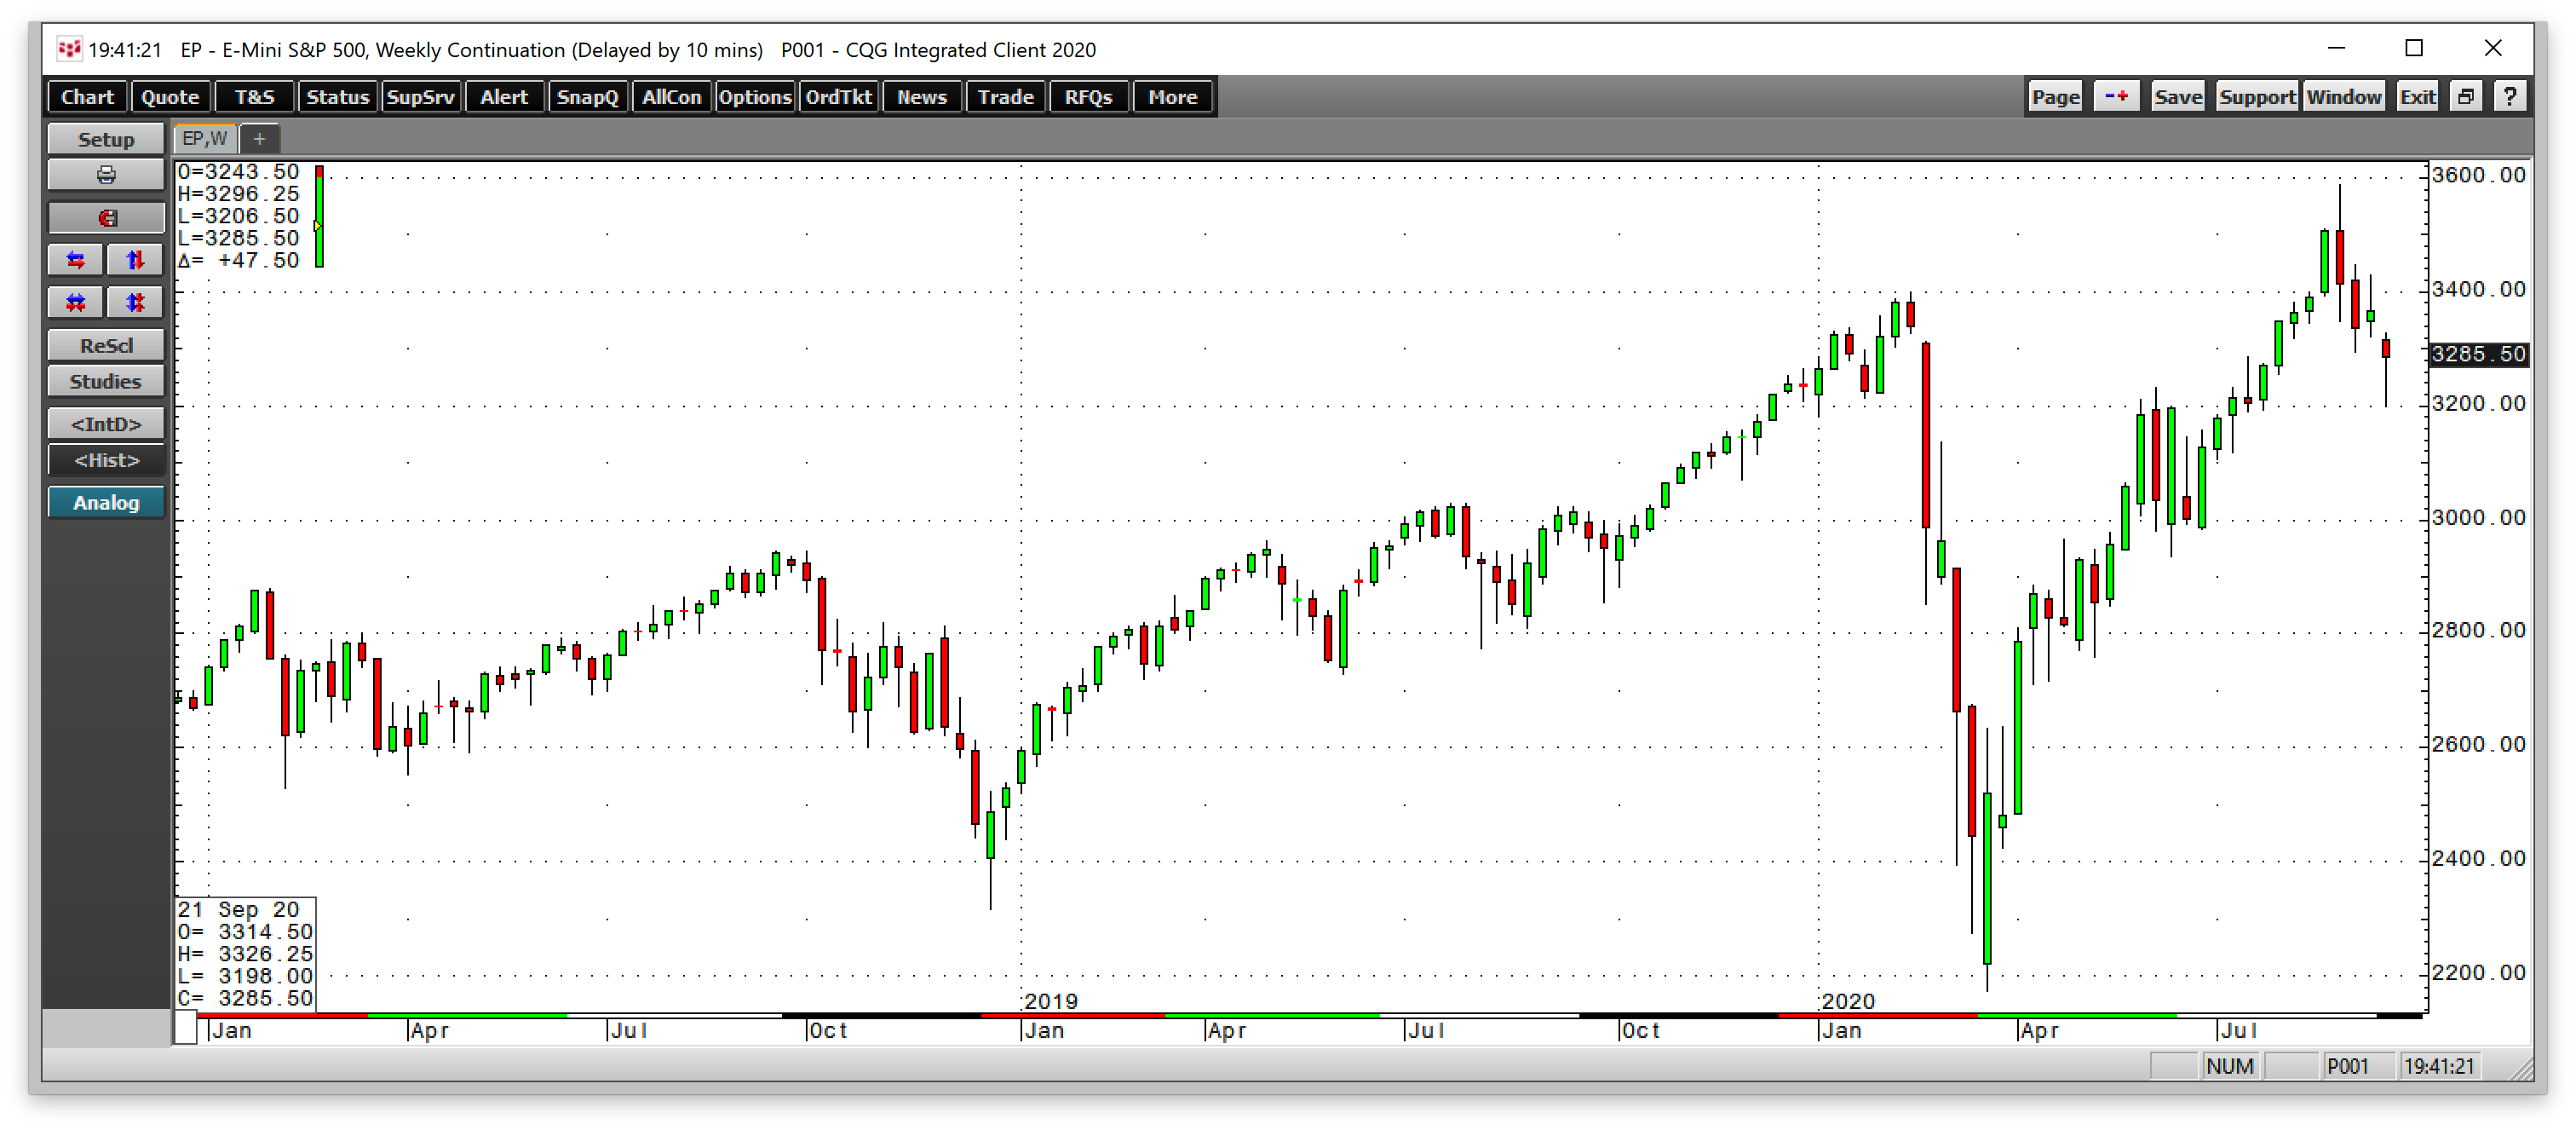 S&P 500 Futures Weekly